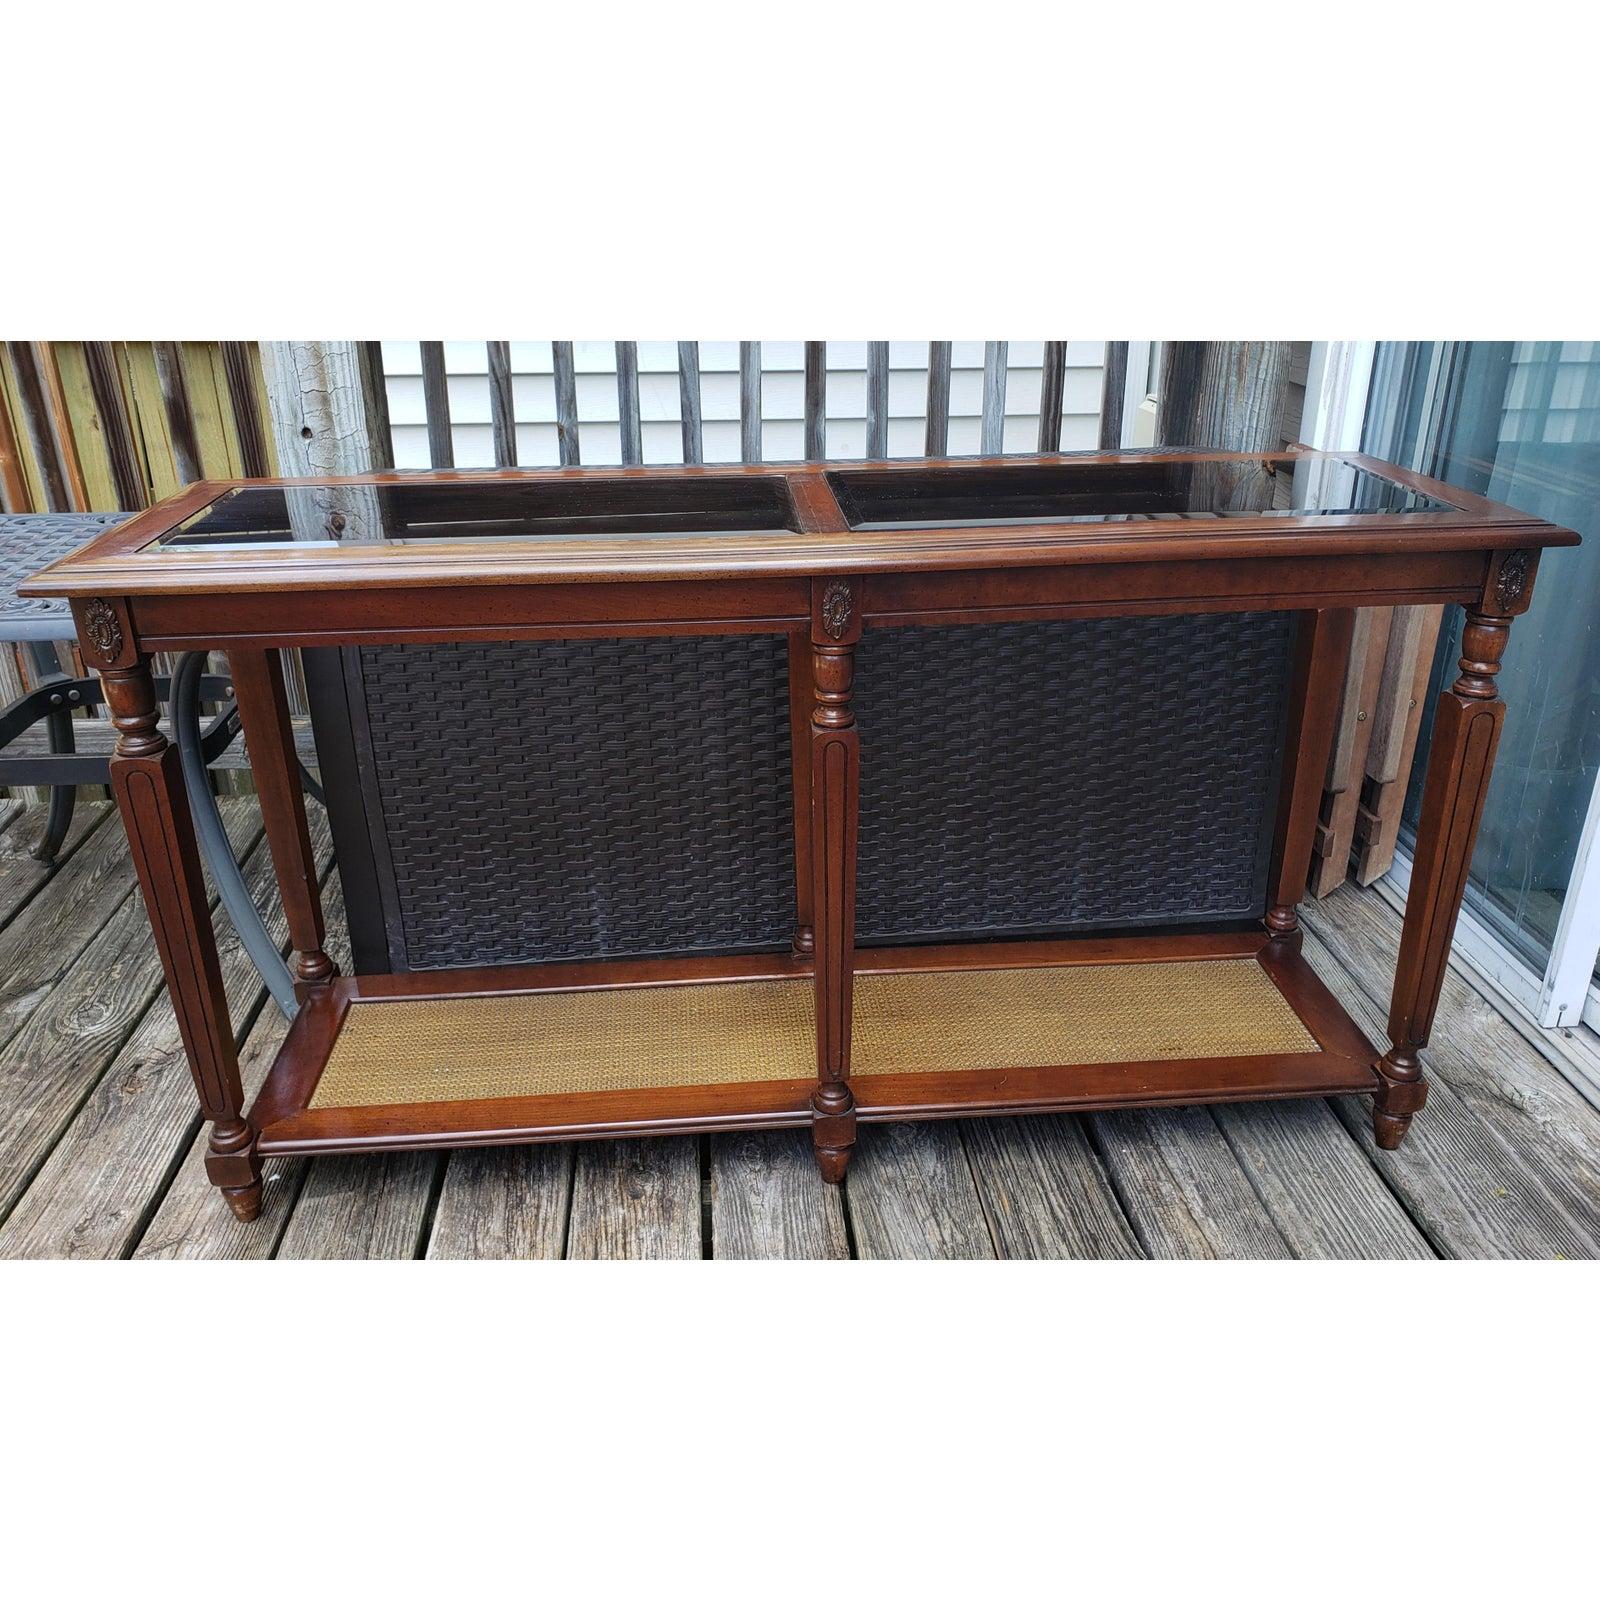 1970s walnut two tier glass top console table with faux caning shelf. Two removable, smoked, beveled glass top inserts. First tier faux caning.
This stunning walnut Mid-century modern two-tier console table in the style of Severin Hansen can be